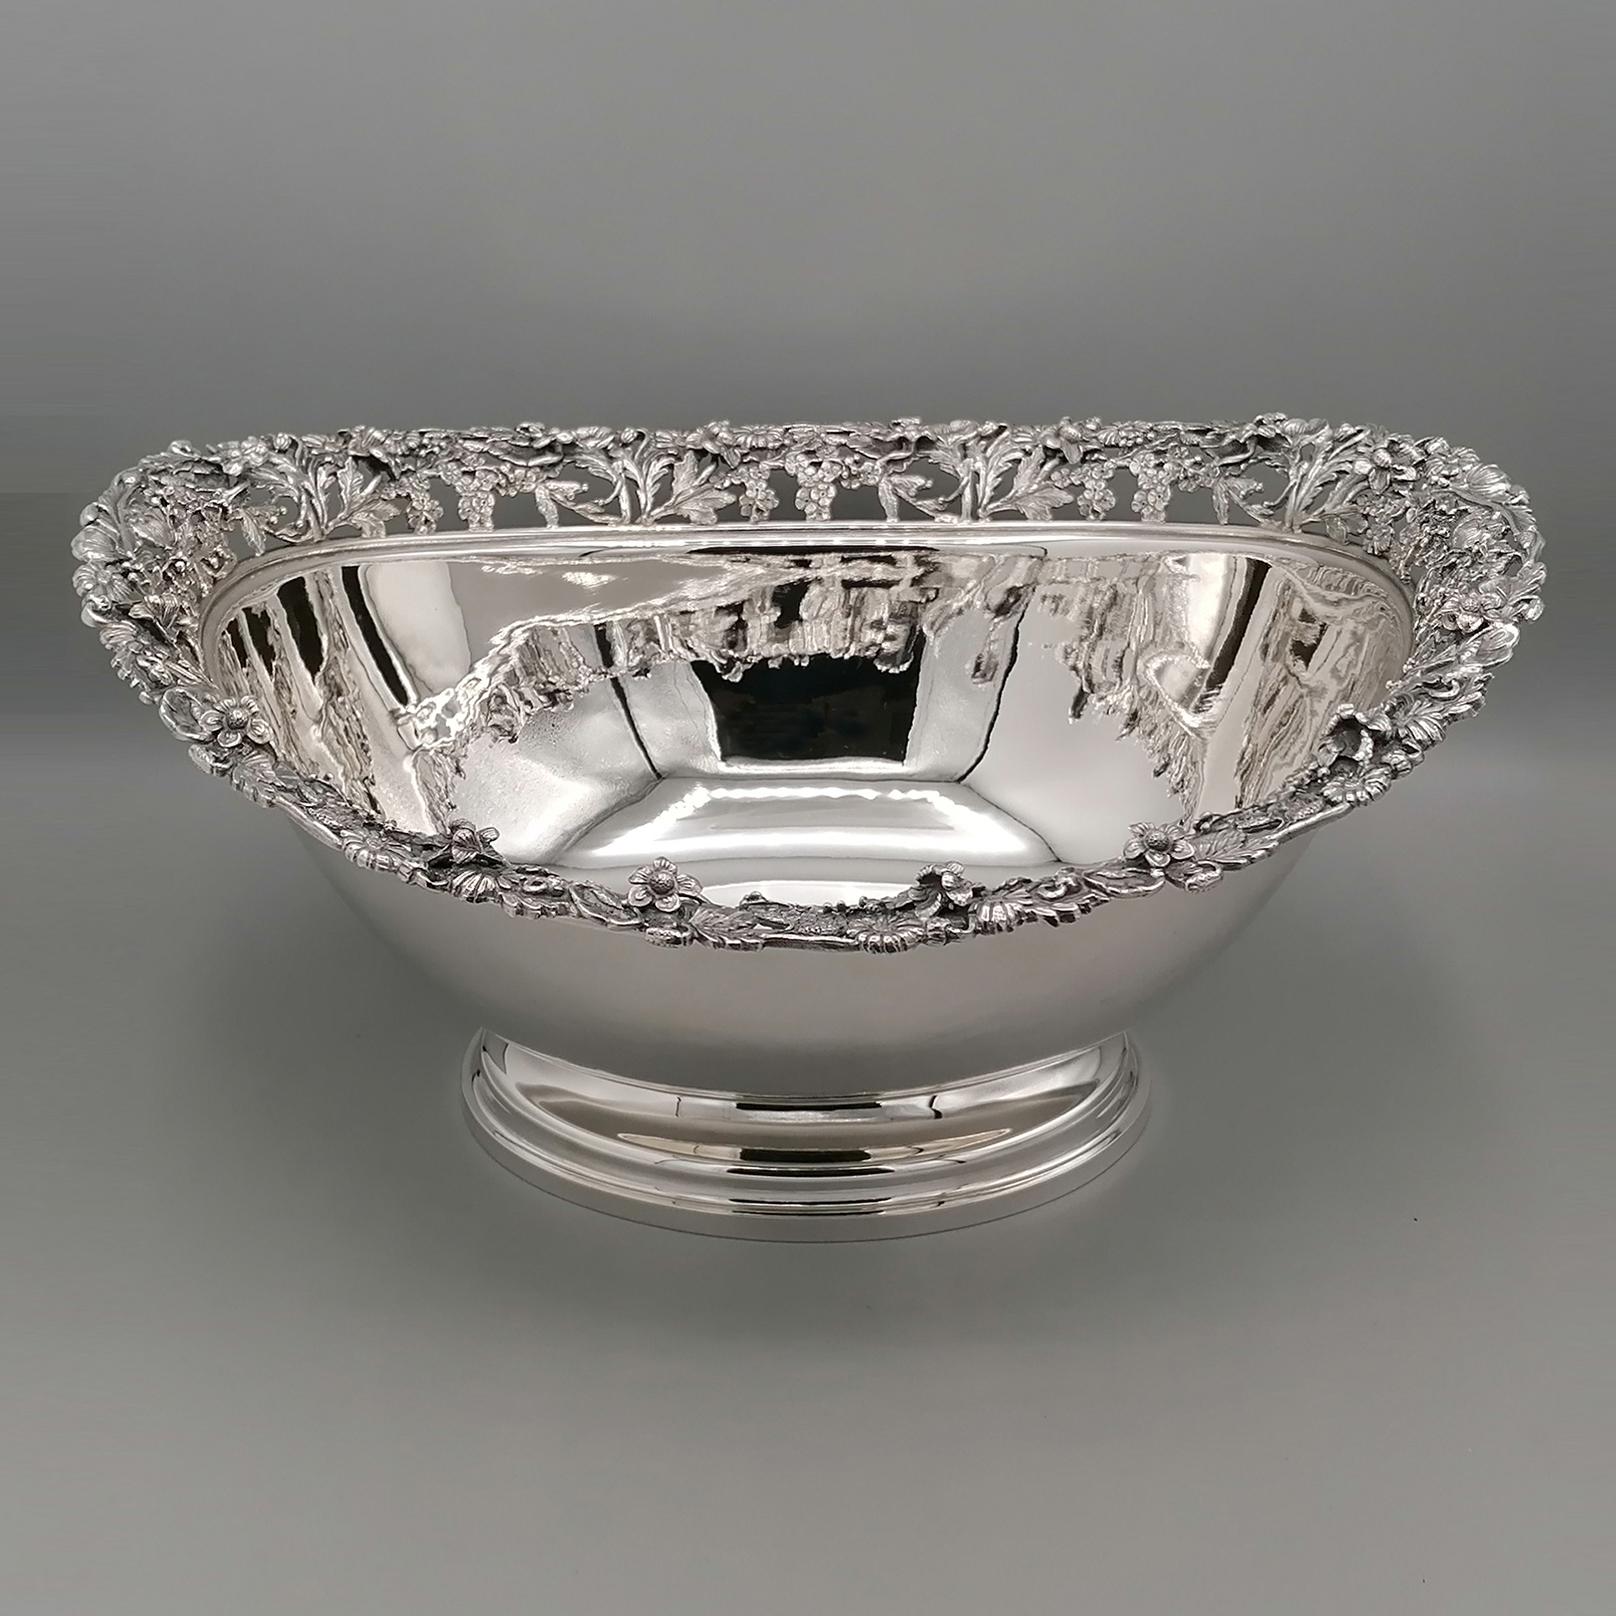 Large Italian centerpiece in solid silver.
The body is oval and completely smooth, under which a smooth base has been welded to elevate the object from the support surface and give it harmony and proportion.
On the upper edge, a wide edge was welded